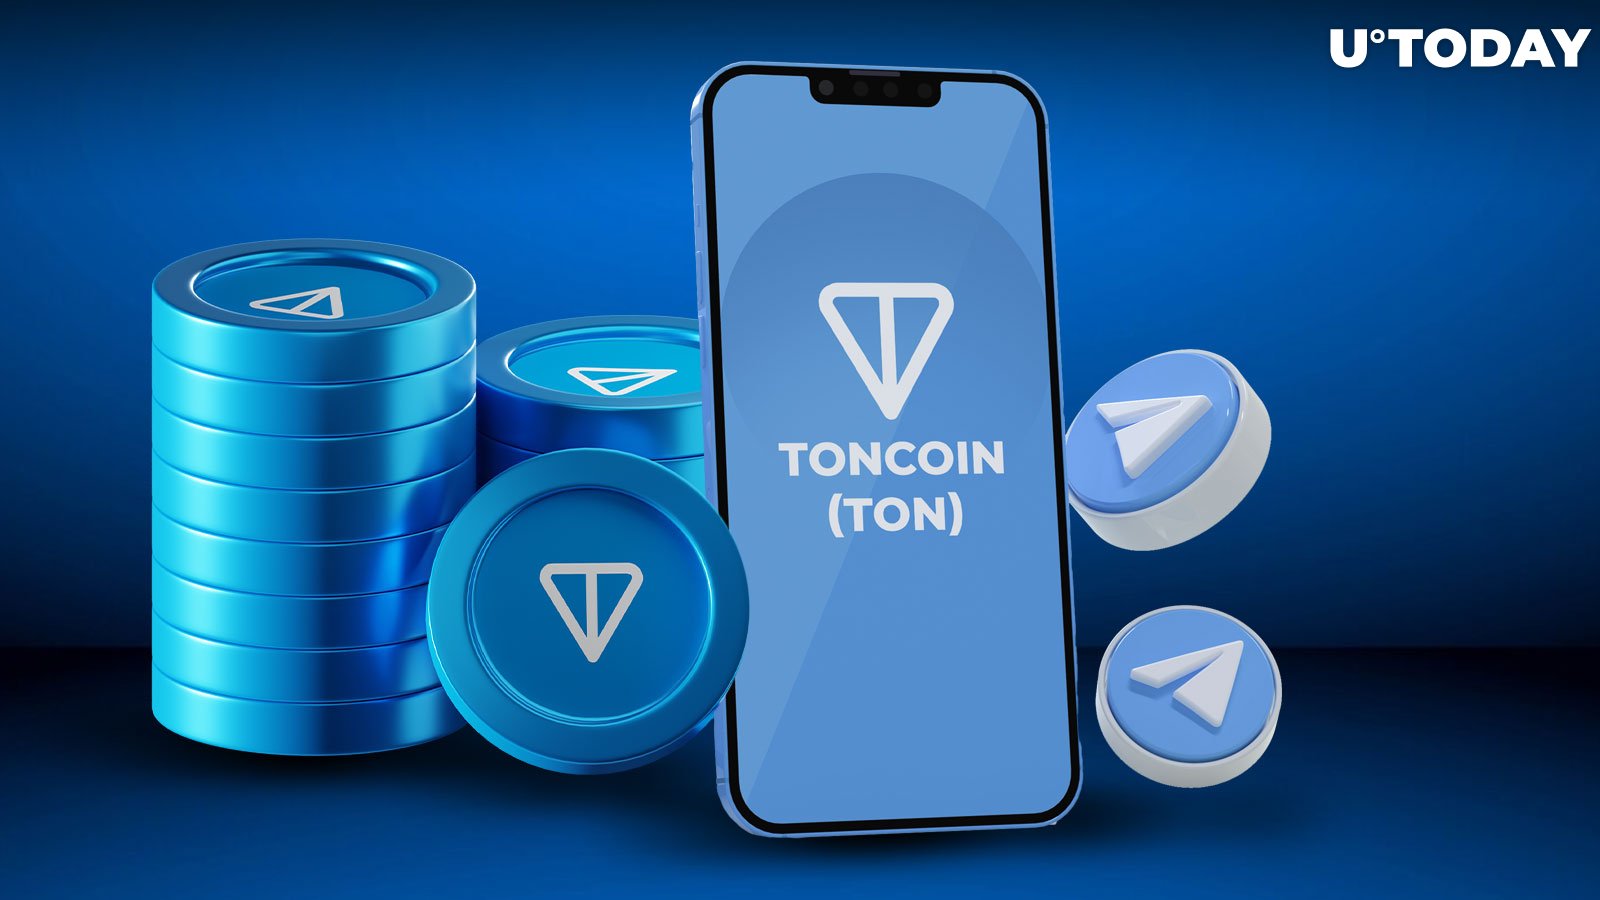 Telegram Becoming Crypto-Based Everything App, What Will Happen to TON?